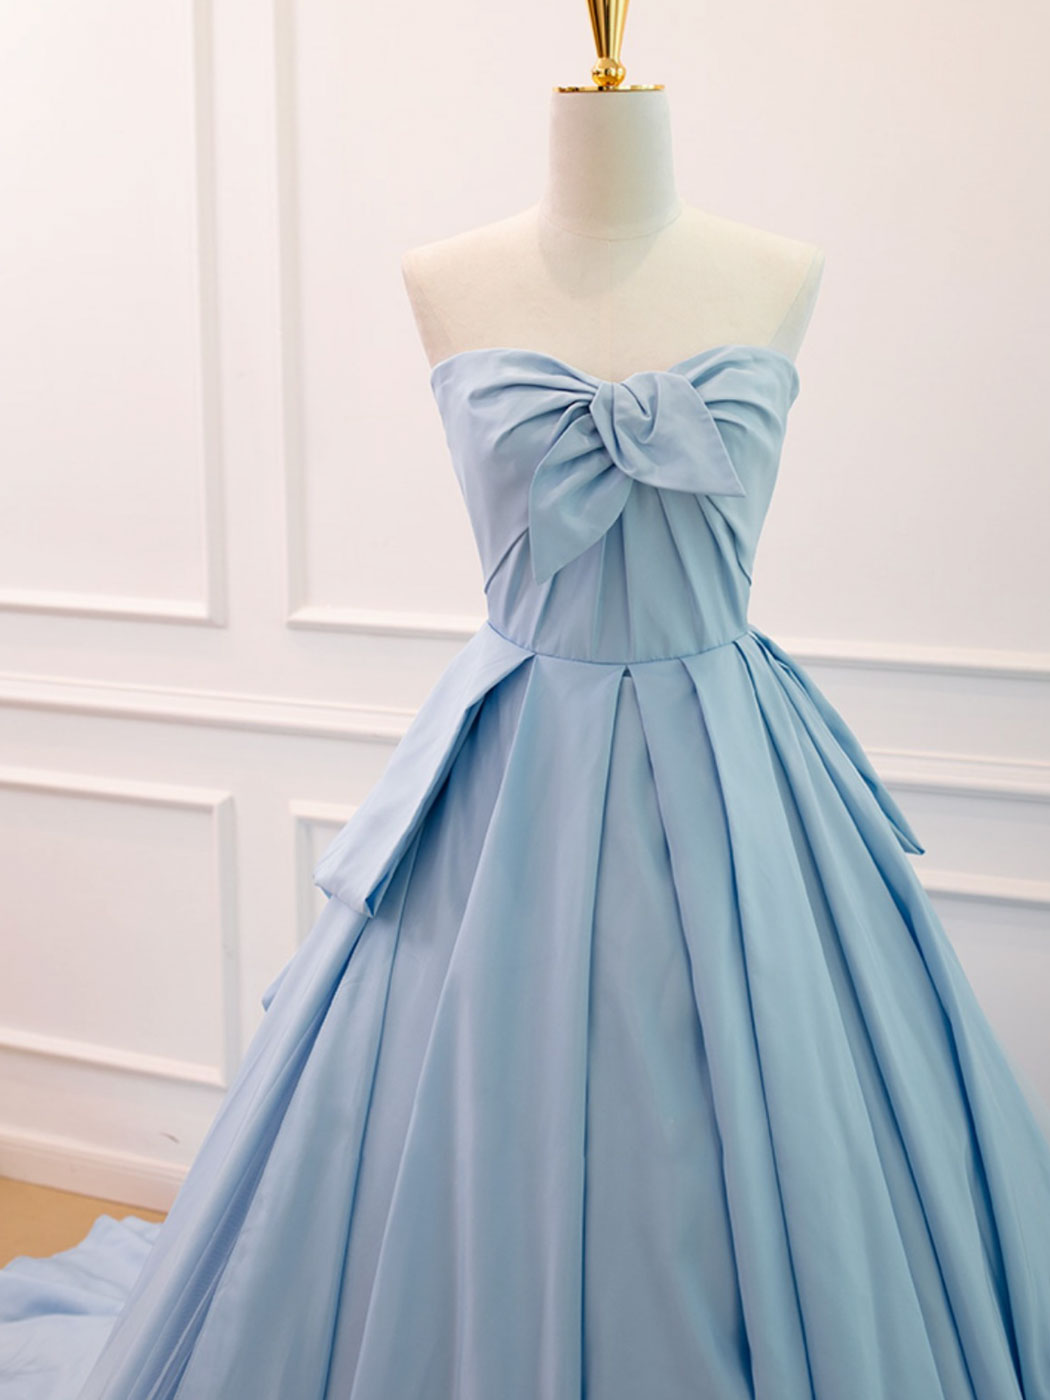 Sky Blue Strapless Ball Gown Ruched Prom Dress Formal Dress - DollyGown